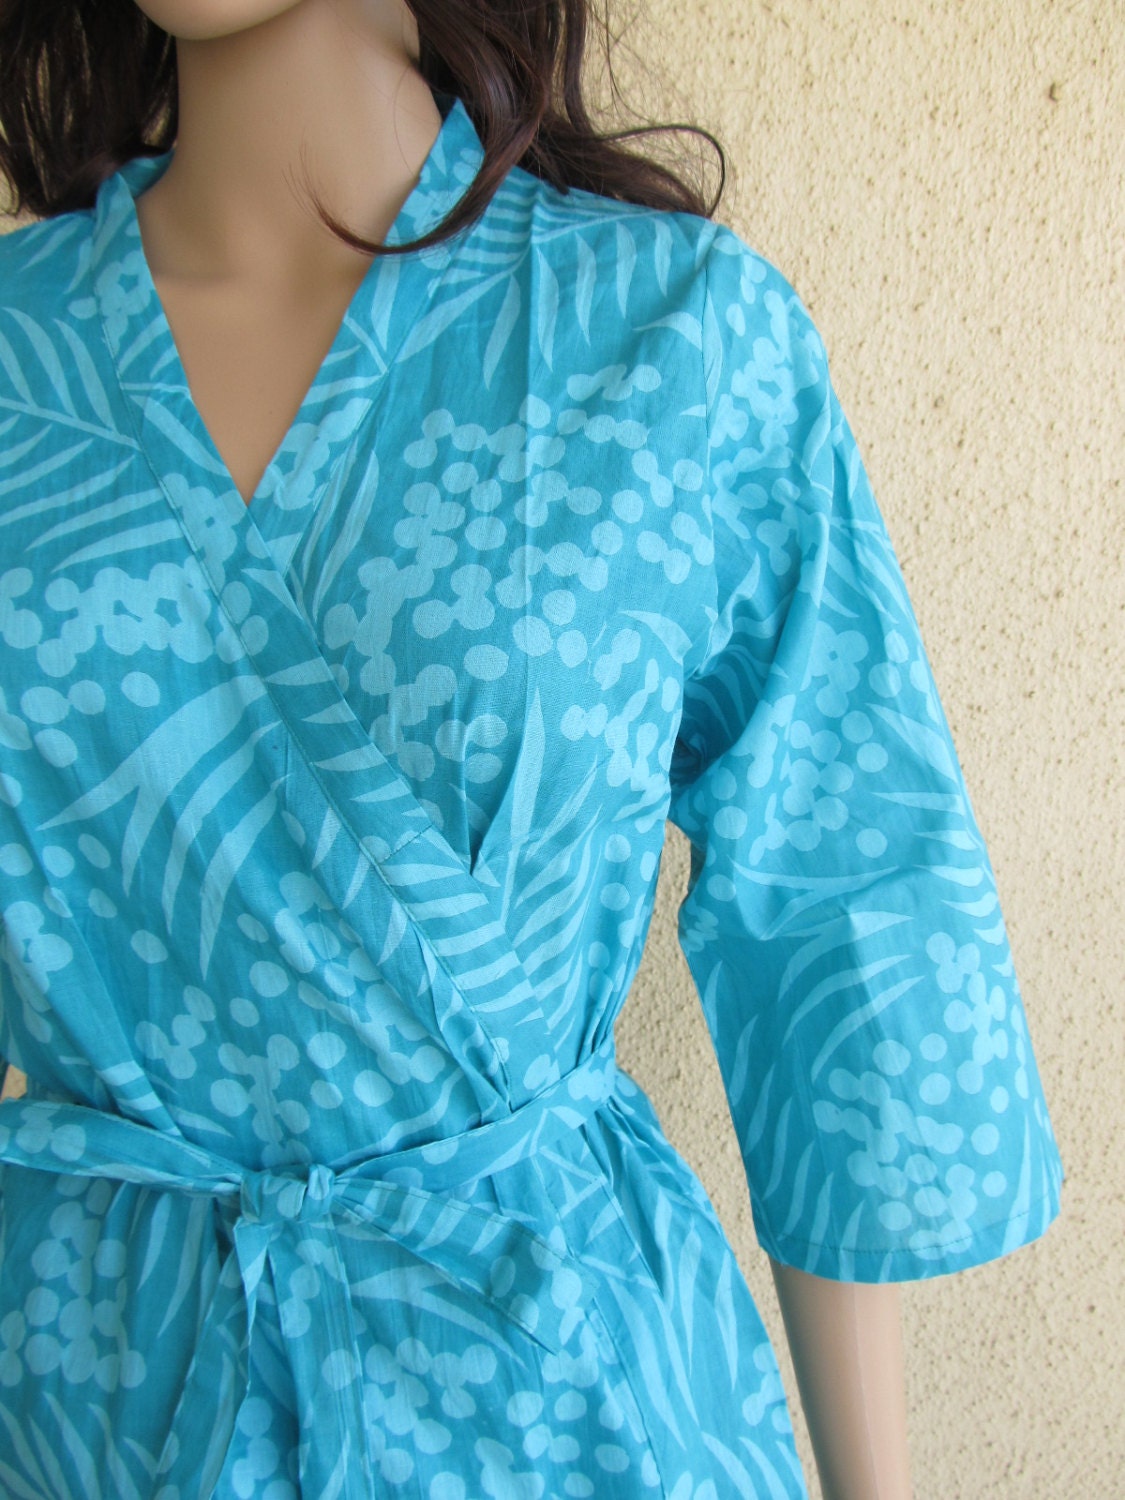 Kimono style robe. Spring Summer Collection. Teal two tone. pure cotton. Ideal as loungewear, beach, swimsuit cover up, bridal - SunsetToSunrise